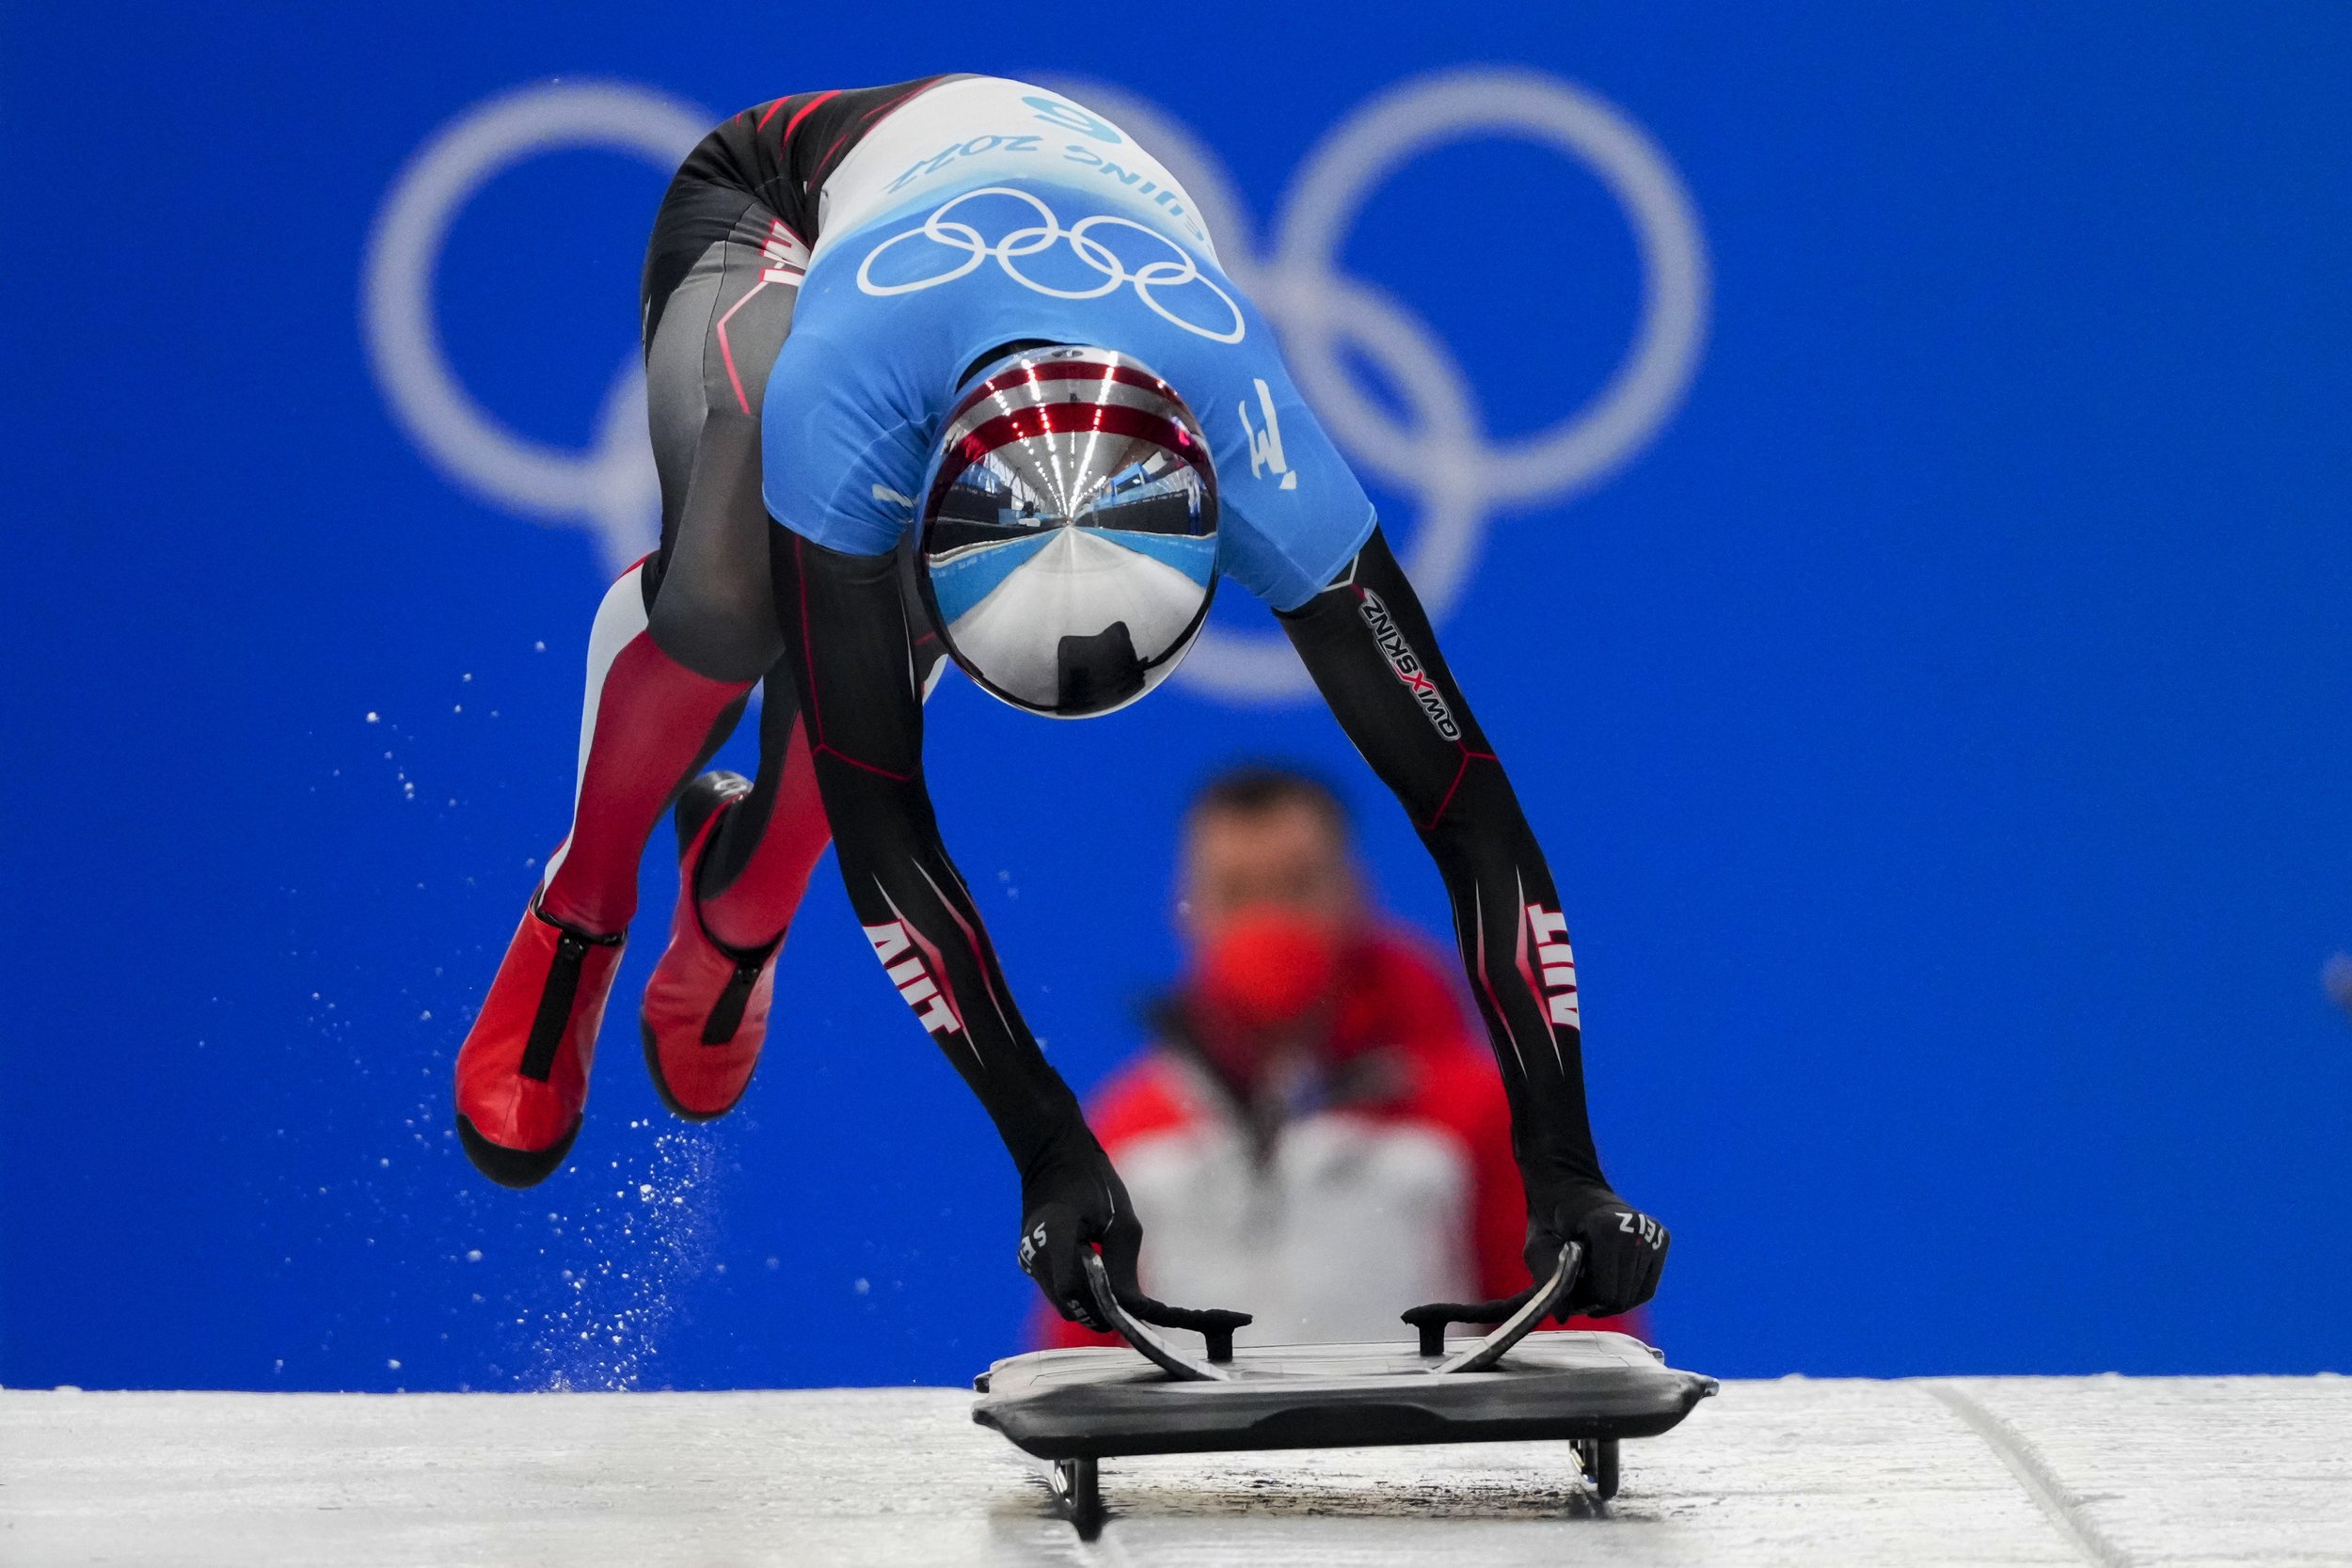  Janine Flock, of Austria, slides during the women's skeleton run 2 at the 2022 Winter Olympics, Friday, Feb. 11, 2022, in the Yanqing district of Beijing. (AP Photo/Dmitri Lovetsky) 